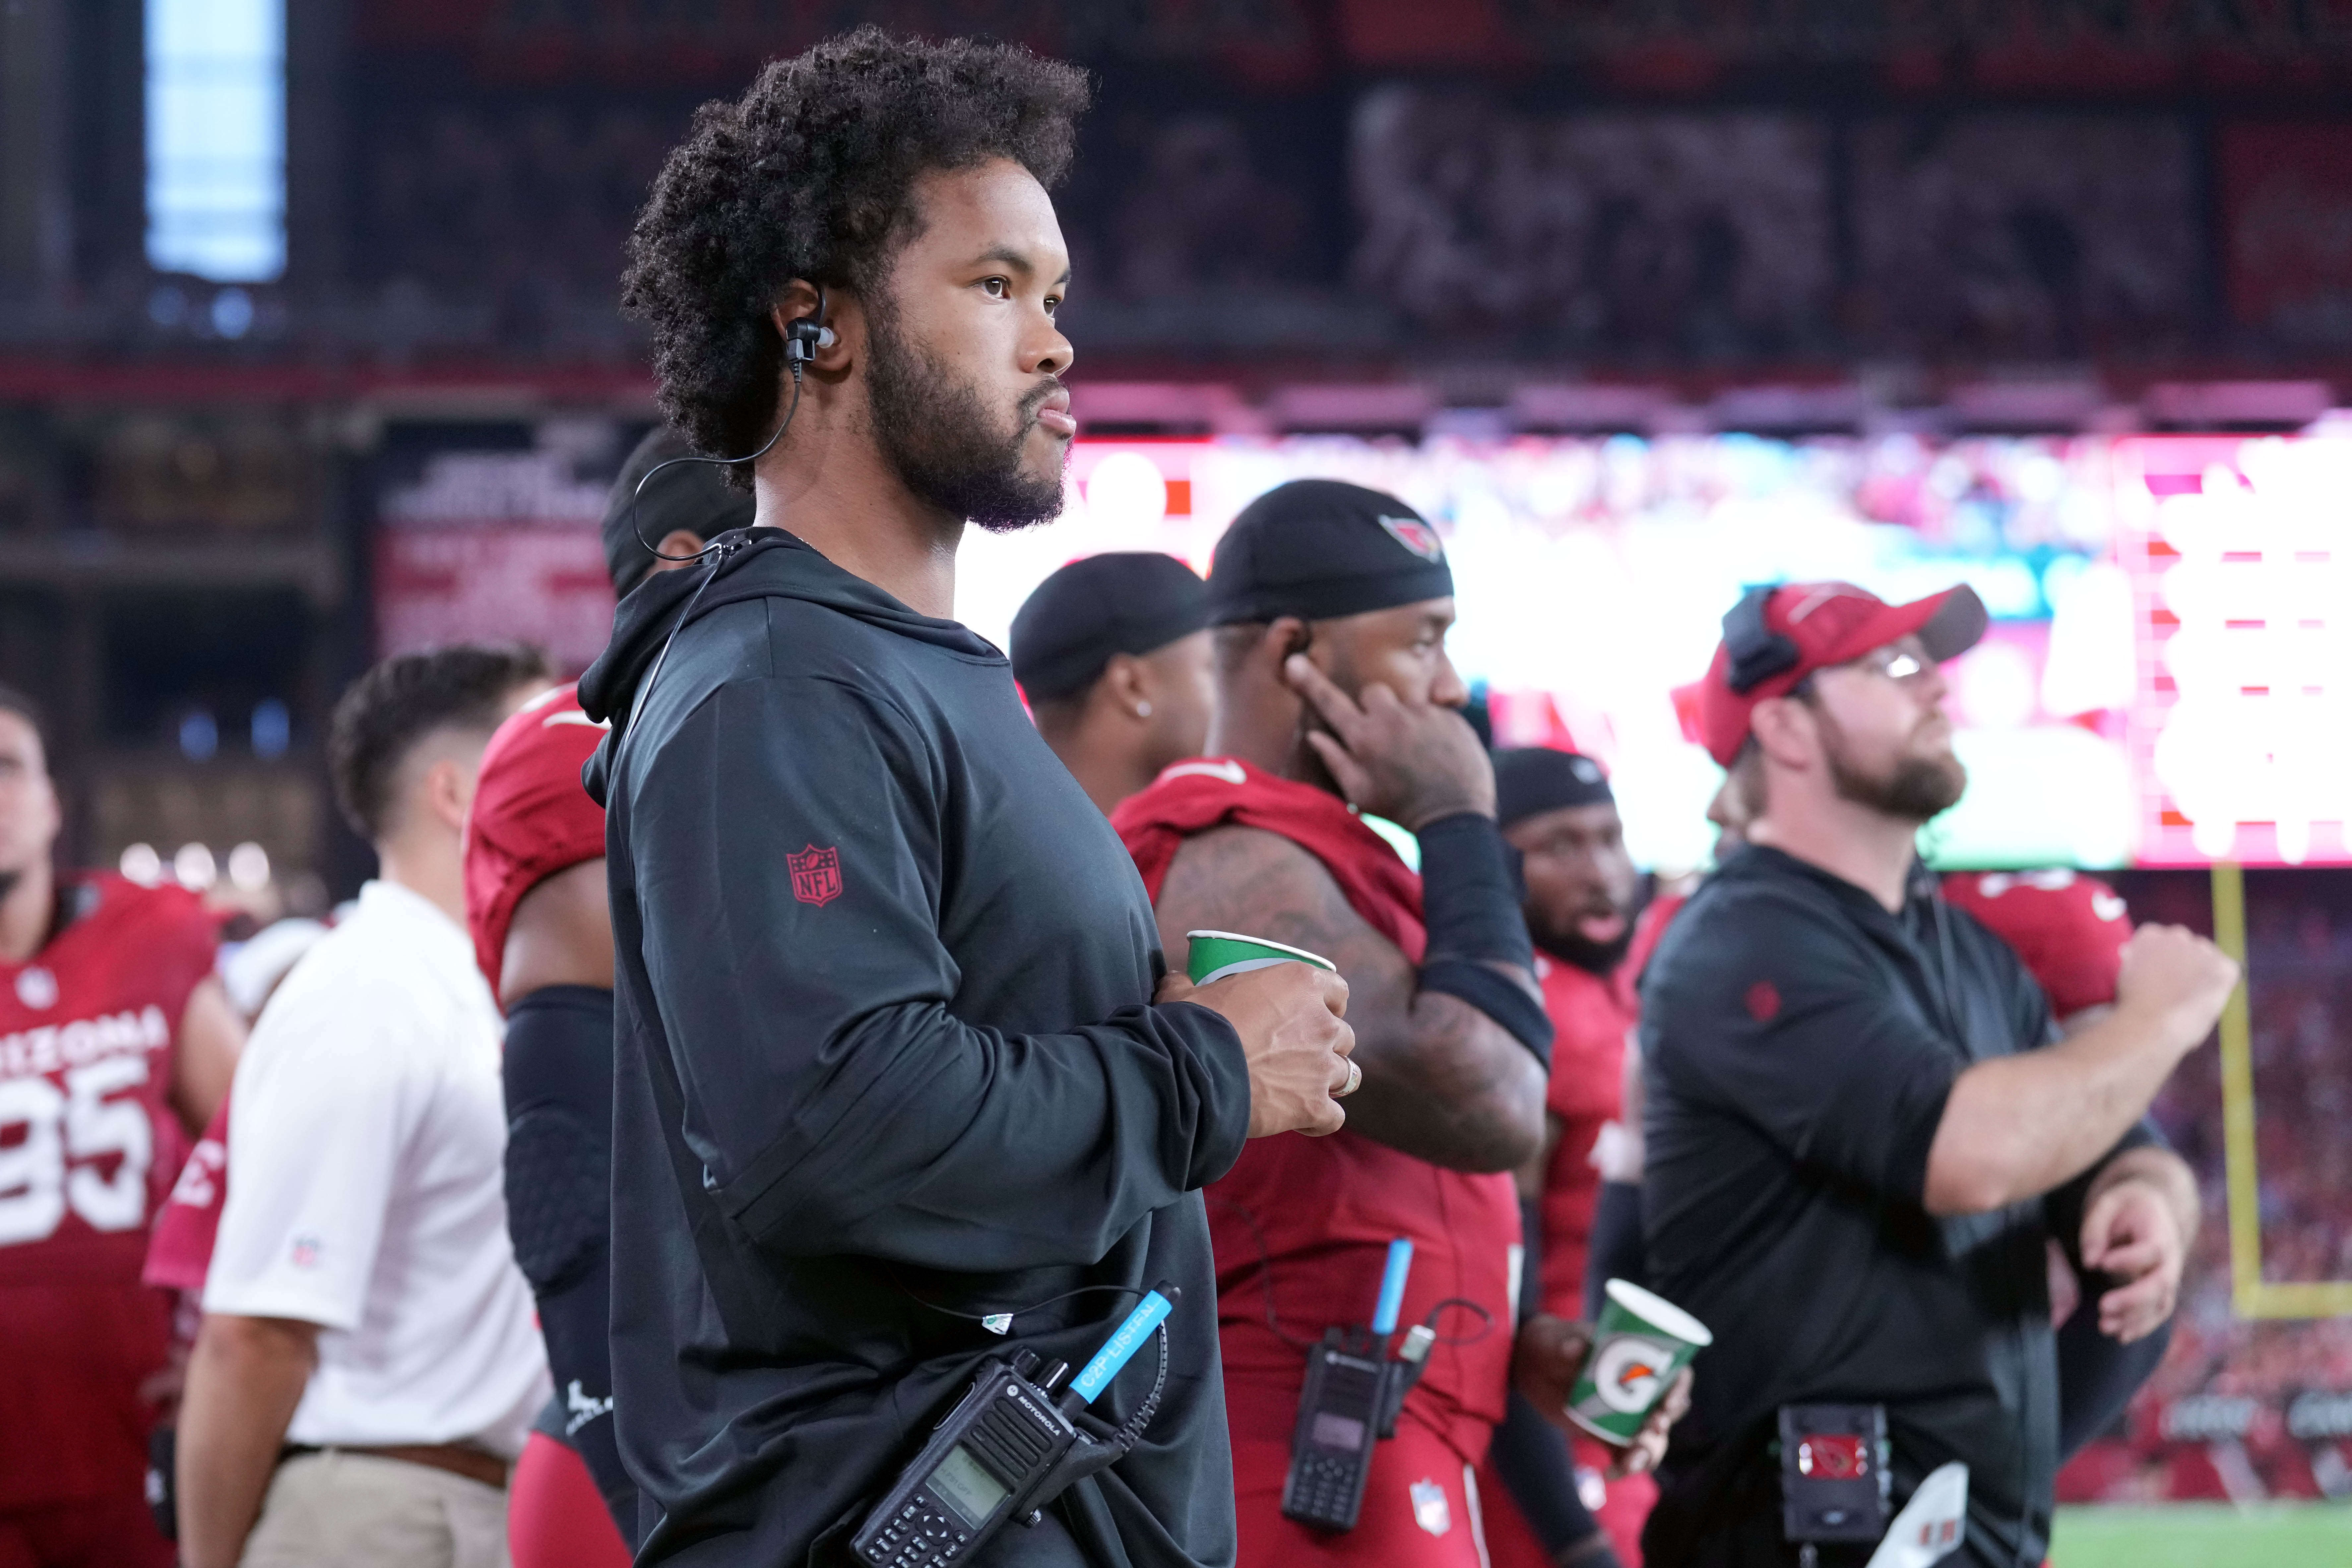 Kyler Murray doubtful to be activated, play vs. Ravens